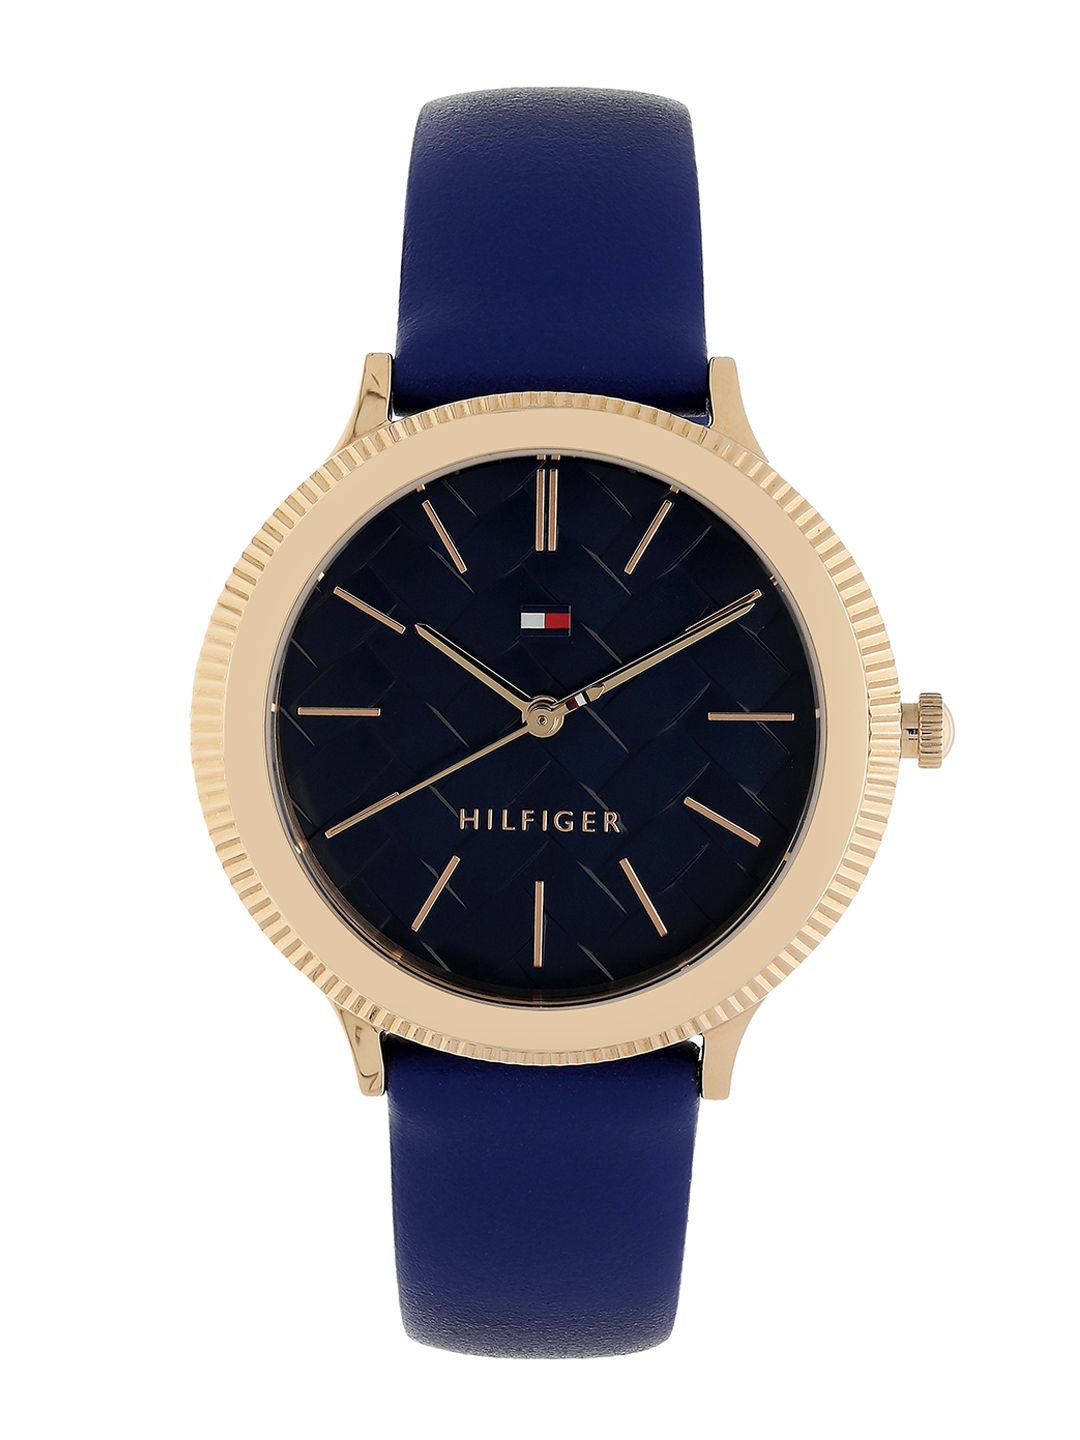 Tommy Hilfiger Women Navy Blue Analogue Watch TH1781860 Price in India